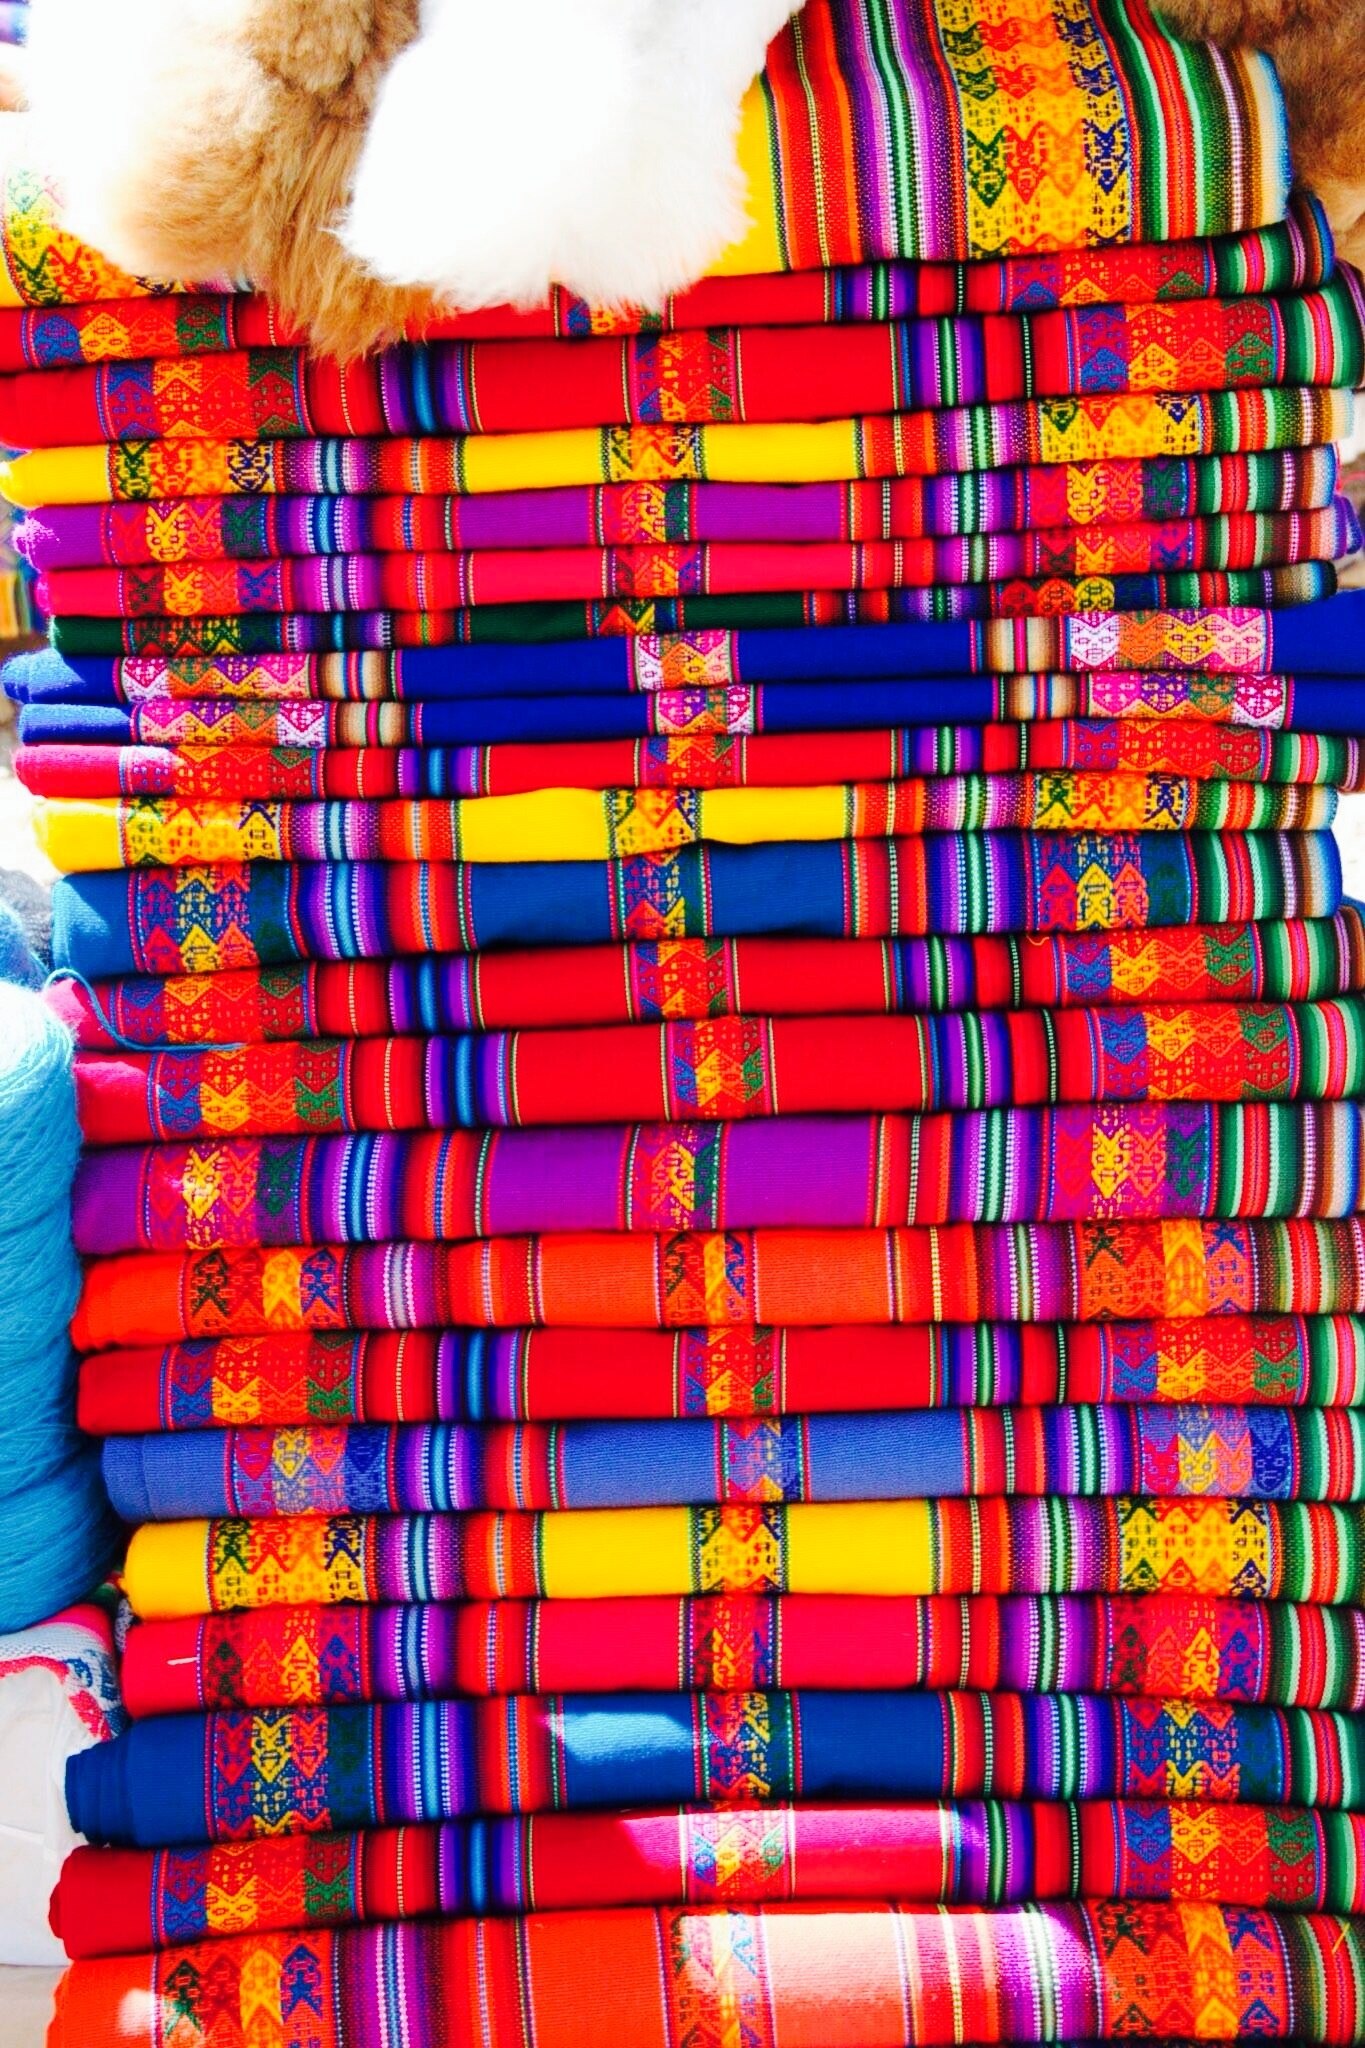 Skilled weavers have long produced elaborate pieces out of wool, cotton and even feathers some with record setting thread counts and mind boggling designs. This is one thing that united the ancient cultures that settled the Andes over the centuries, it's a textile tradition that is beyond 
#colorful